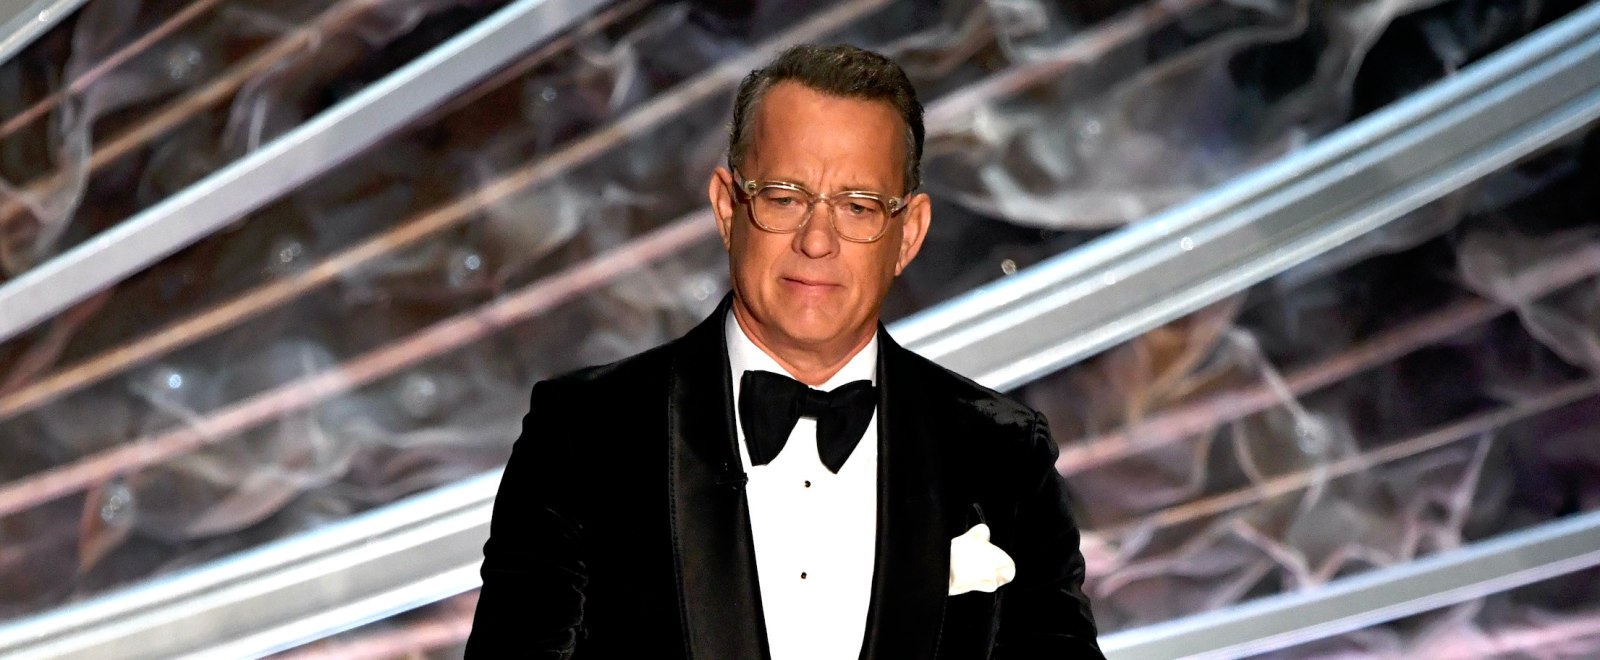 Notorious Bully Tom Hanks Finally Apologized To Connor Ratliff 20 Years After Firing Him For Having ‘Dead Eyes’